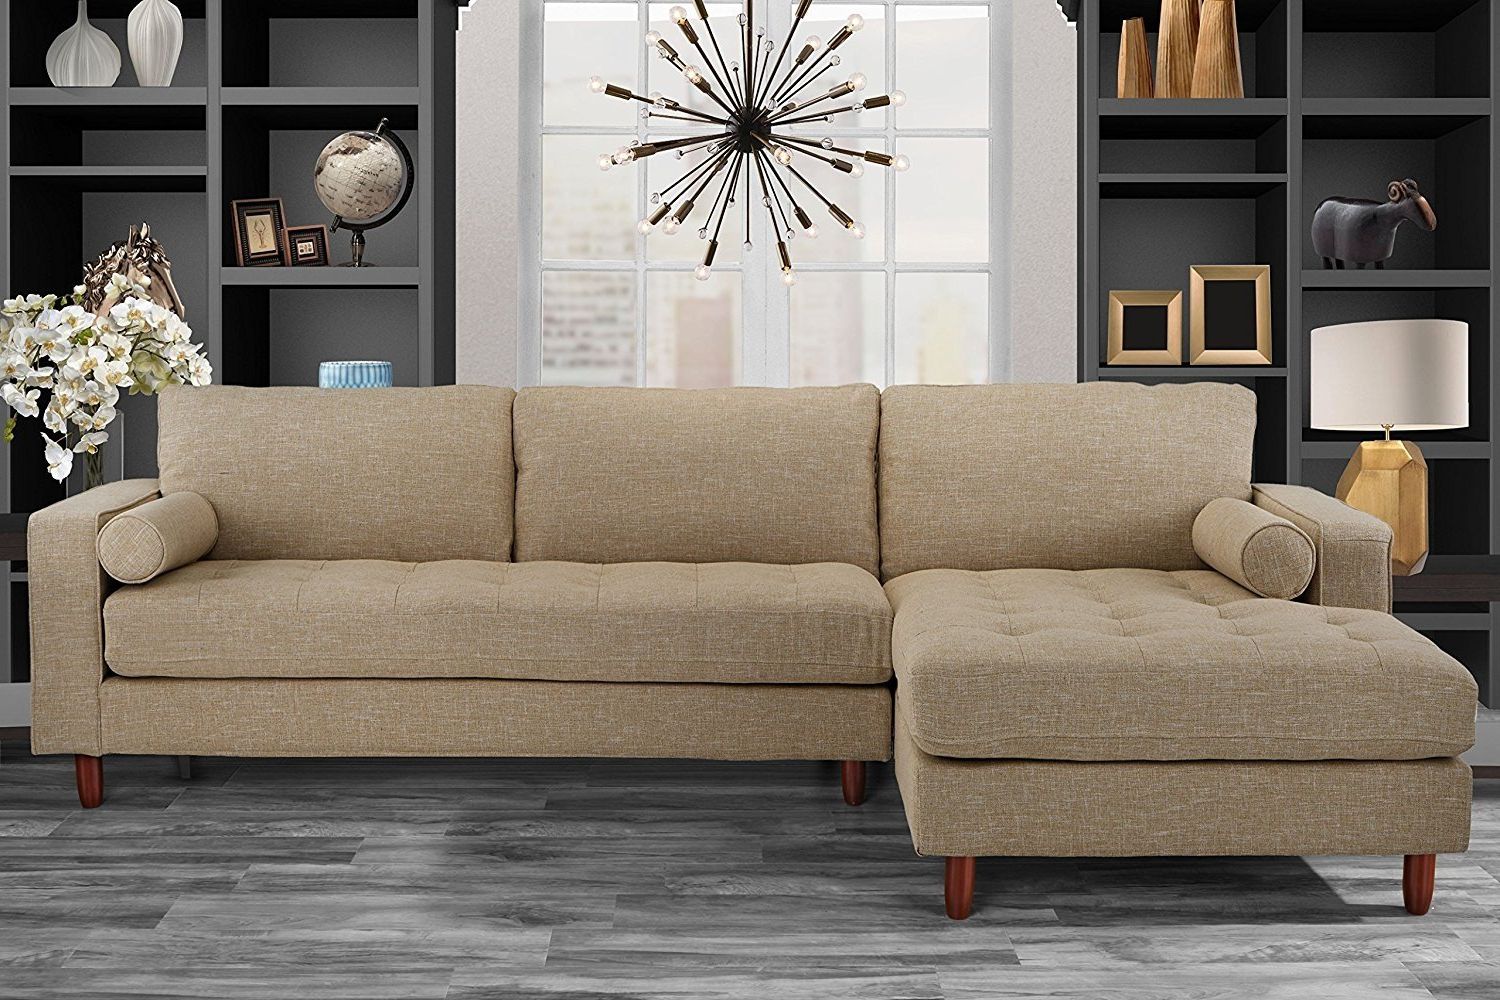 Small L Shaped Sectional Sofas In Beige Regarding Latest Mid Century Modern Tufted Fabric Sectional Sofa, L Shape Couch Beige (View 6 of 15)